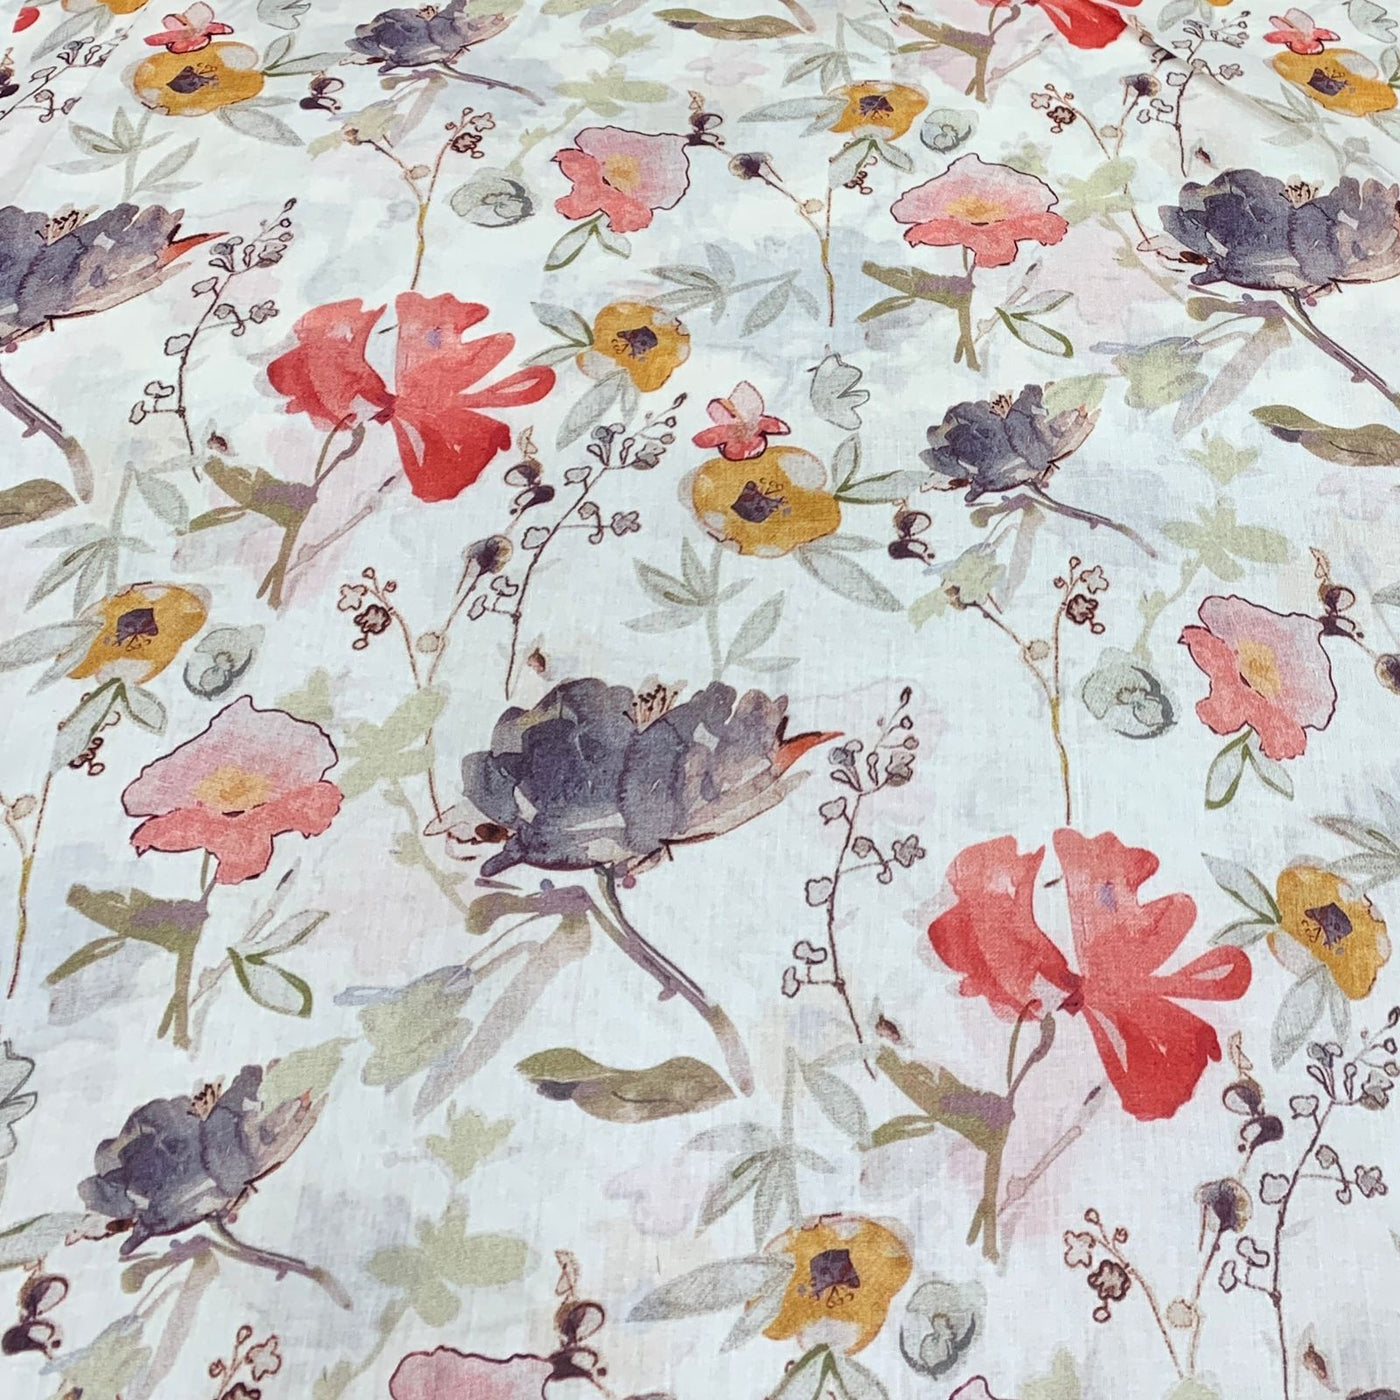 Cotton Lawn Printed Fabric